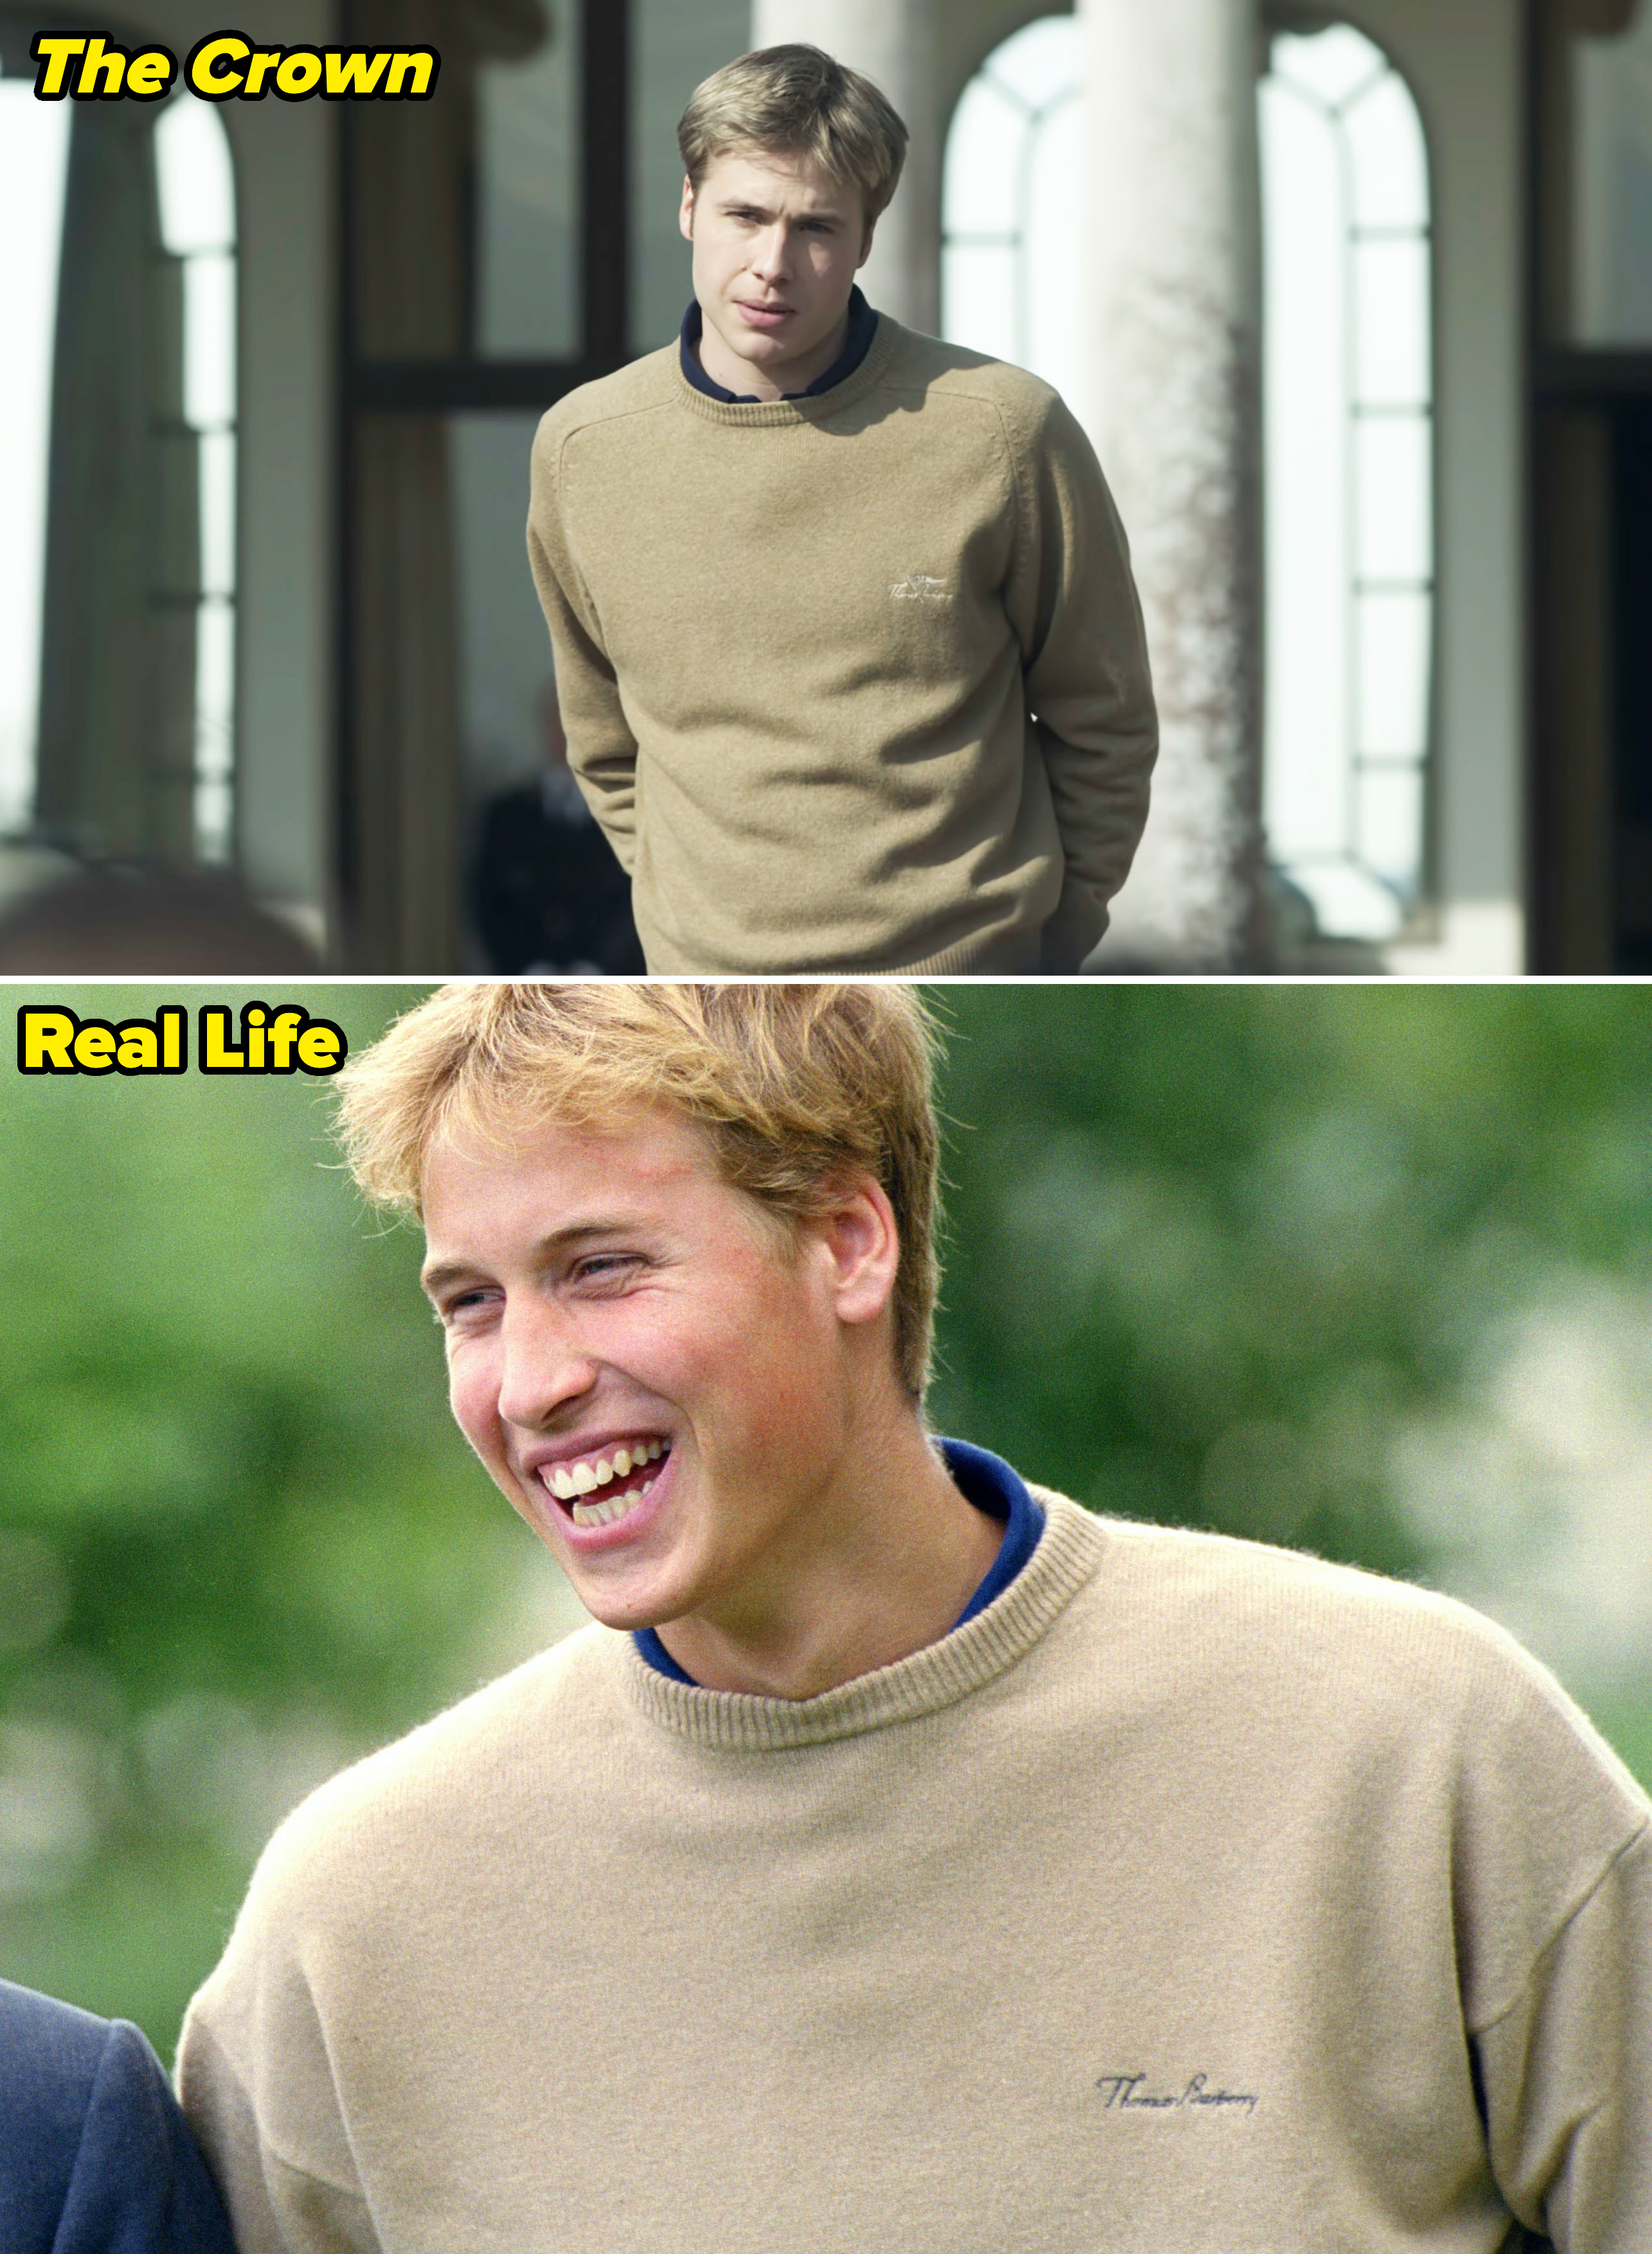 Side-by-side images of real life vs. &quot;The Crown&quot; of Prince William